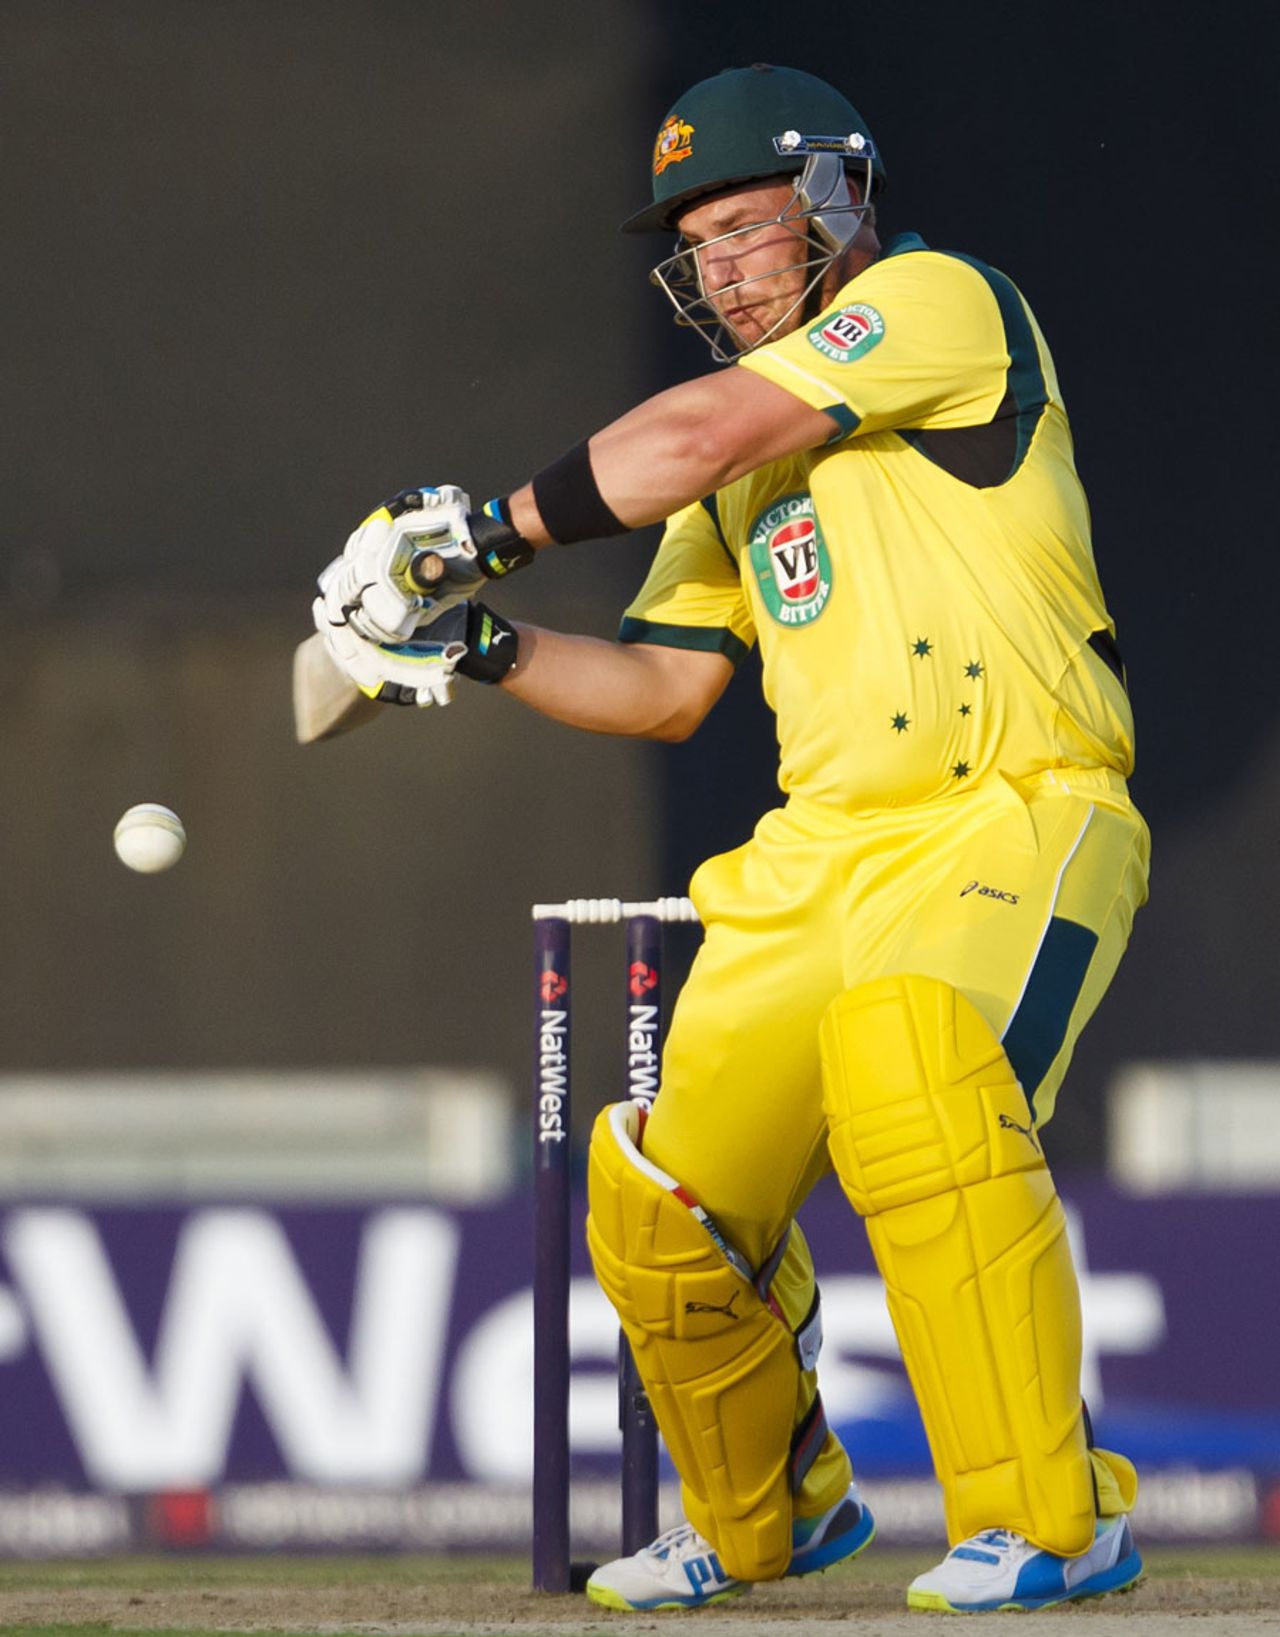 Aaron Finch blazed his way with 14 sixes, England v Australia, 1st T20, Ageas Bowl, August 29, 2013